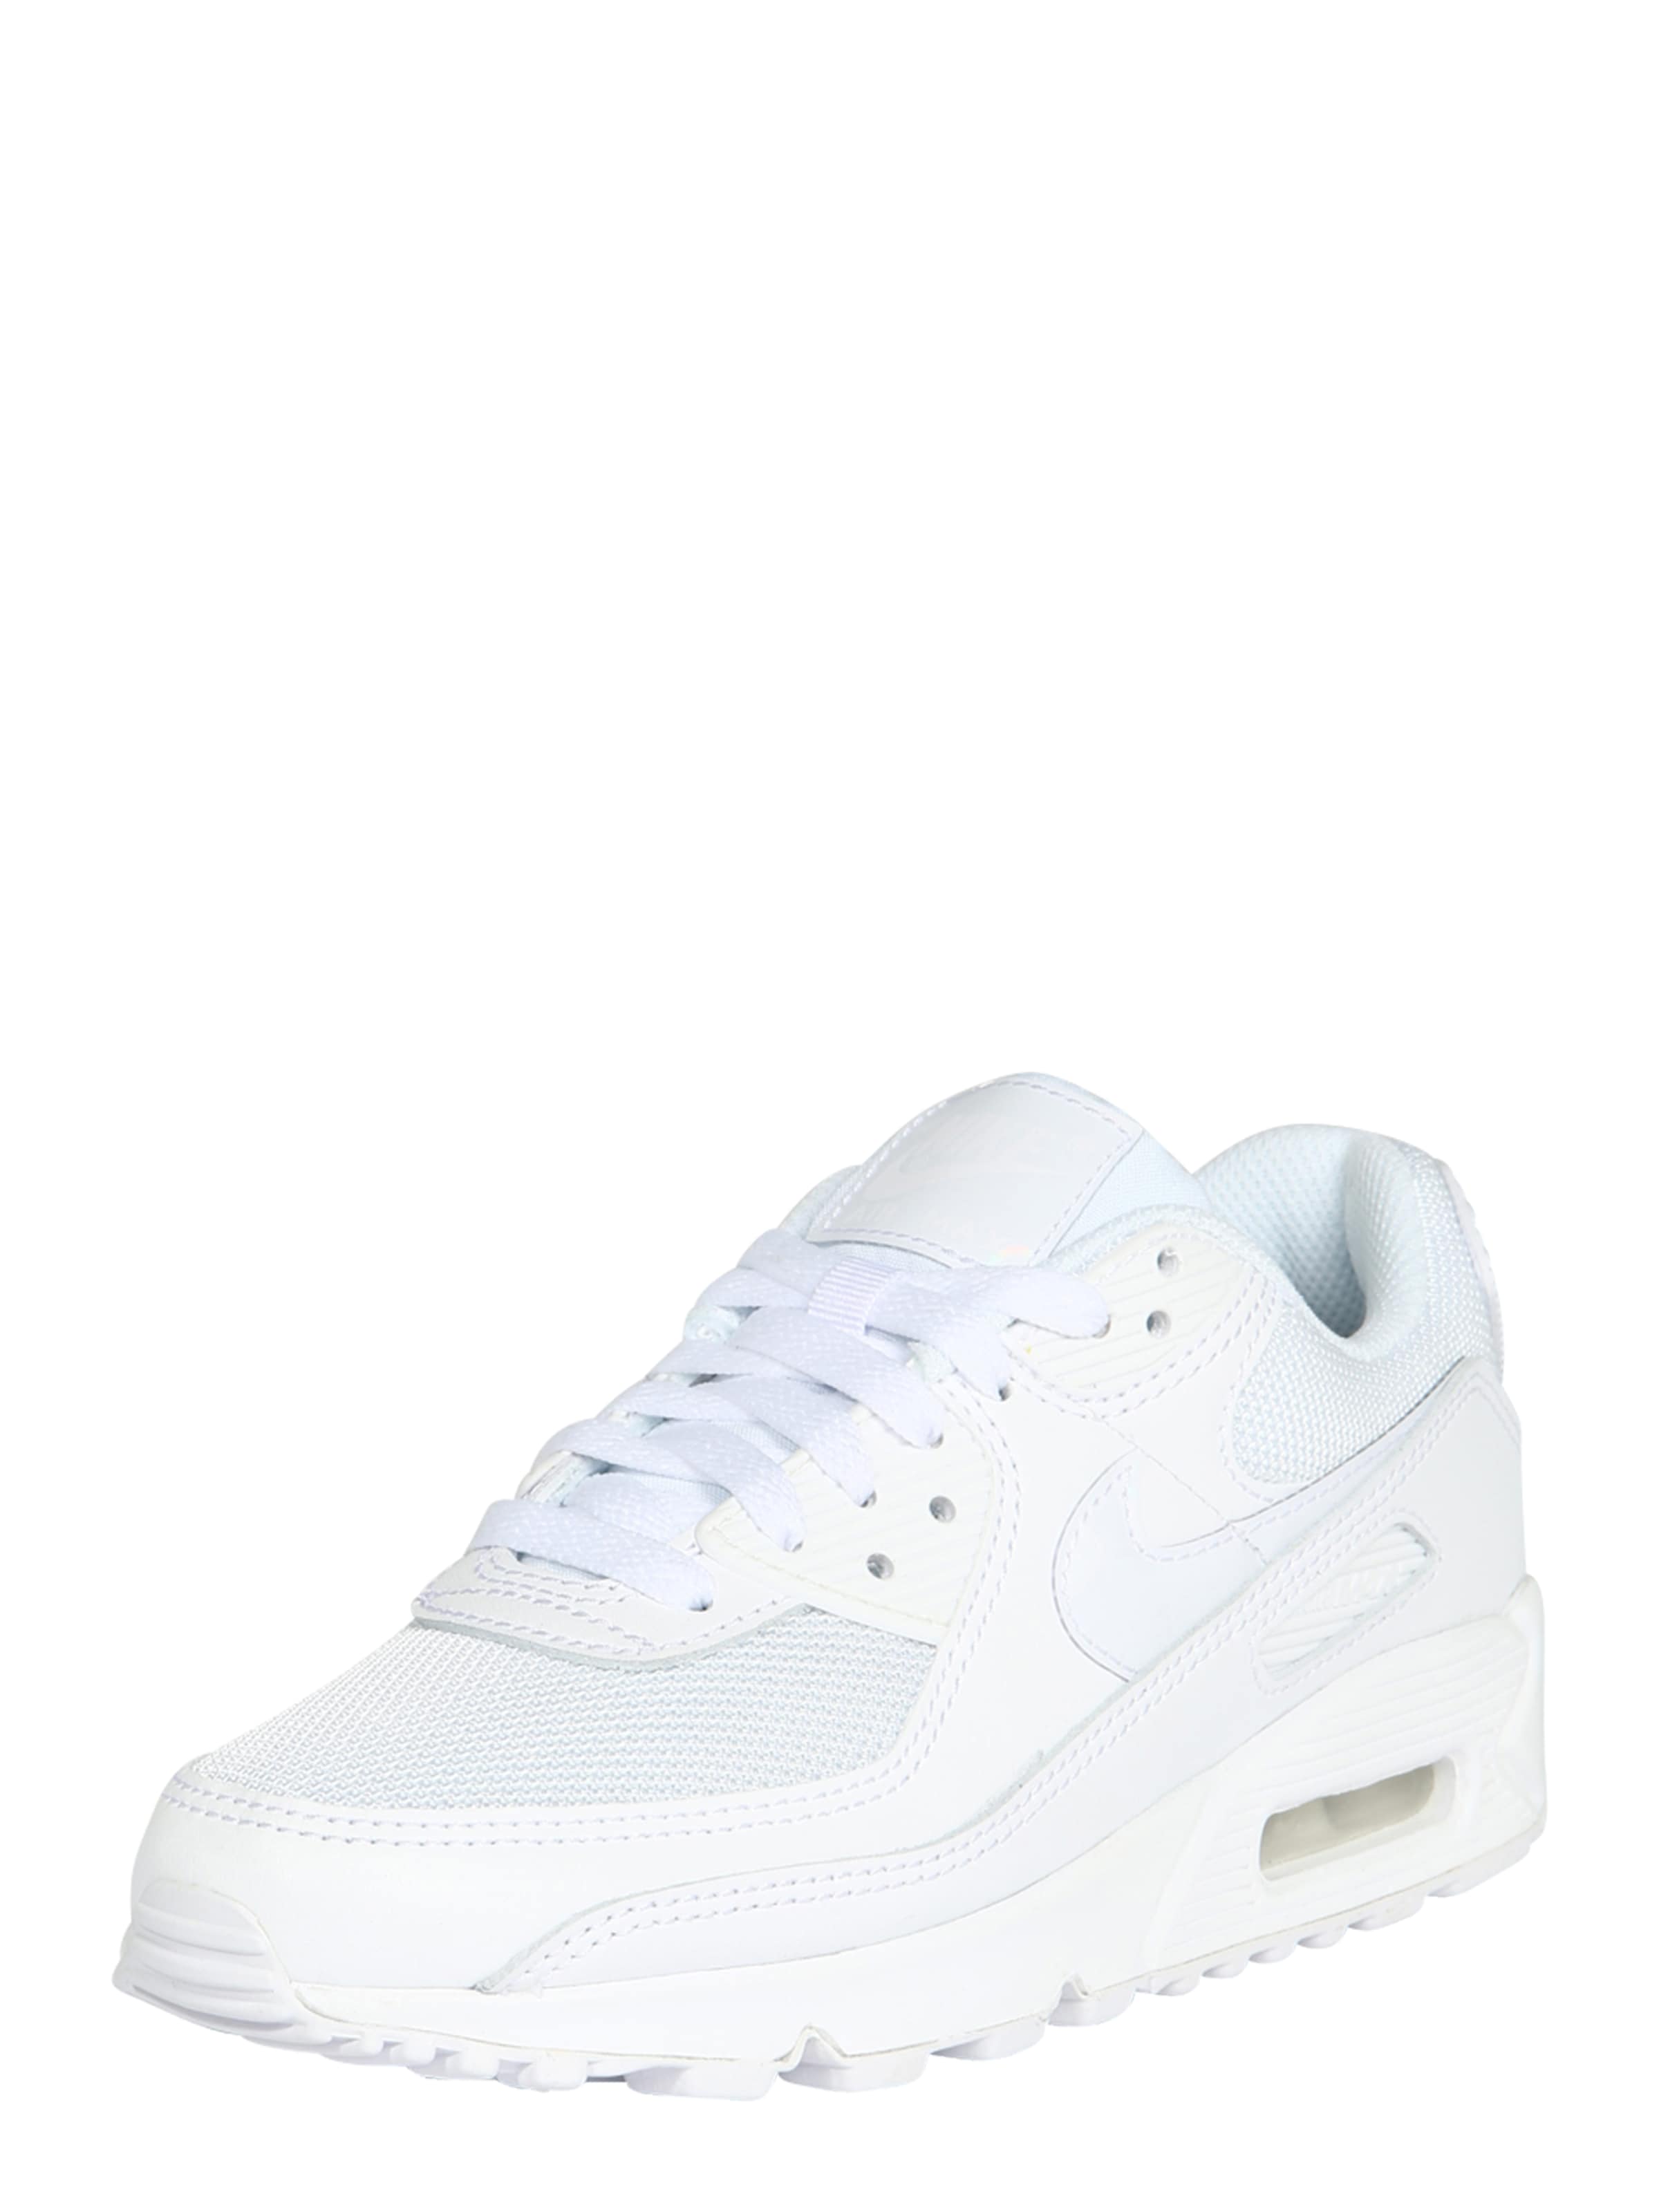 witte airmax